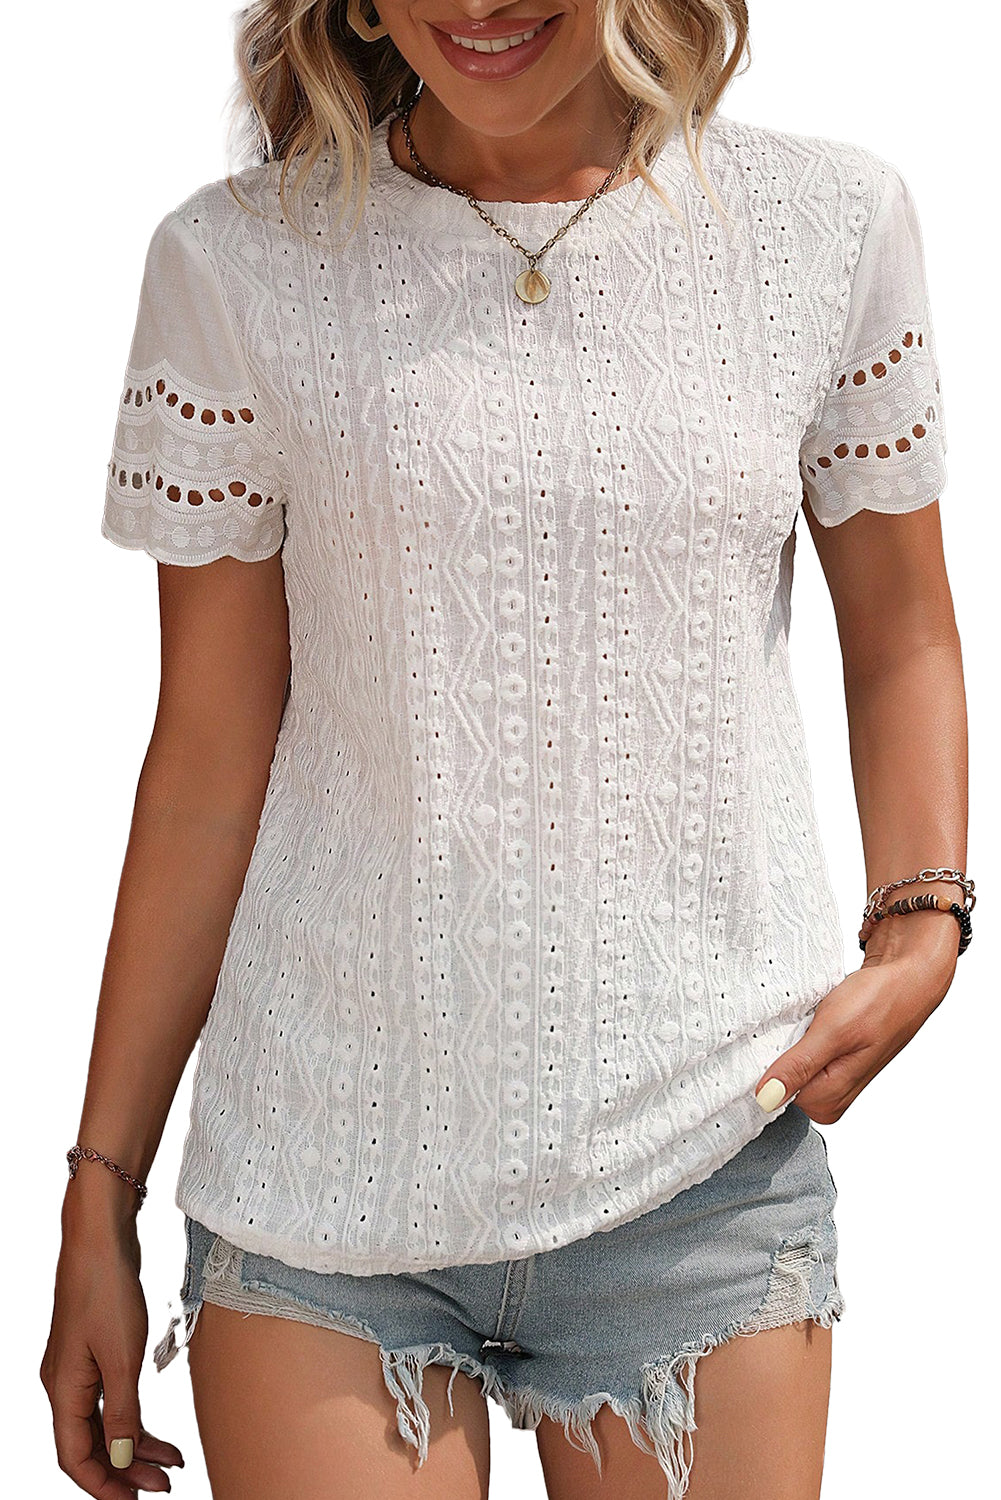 White Eyelet Embroidery S/S Top